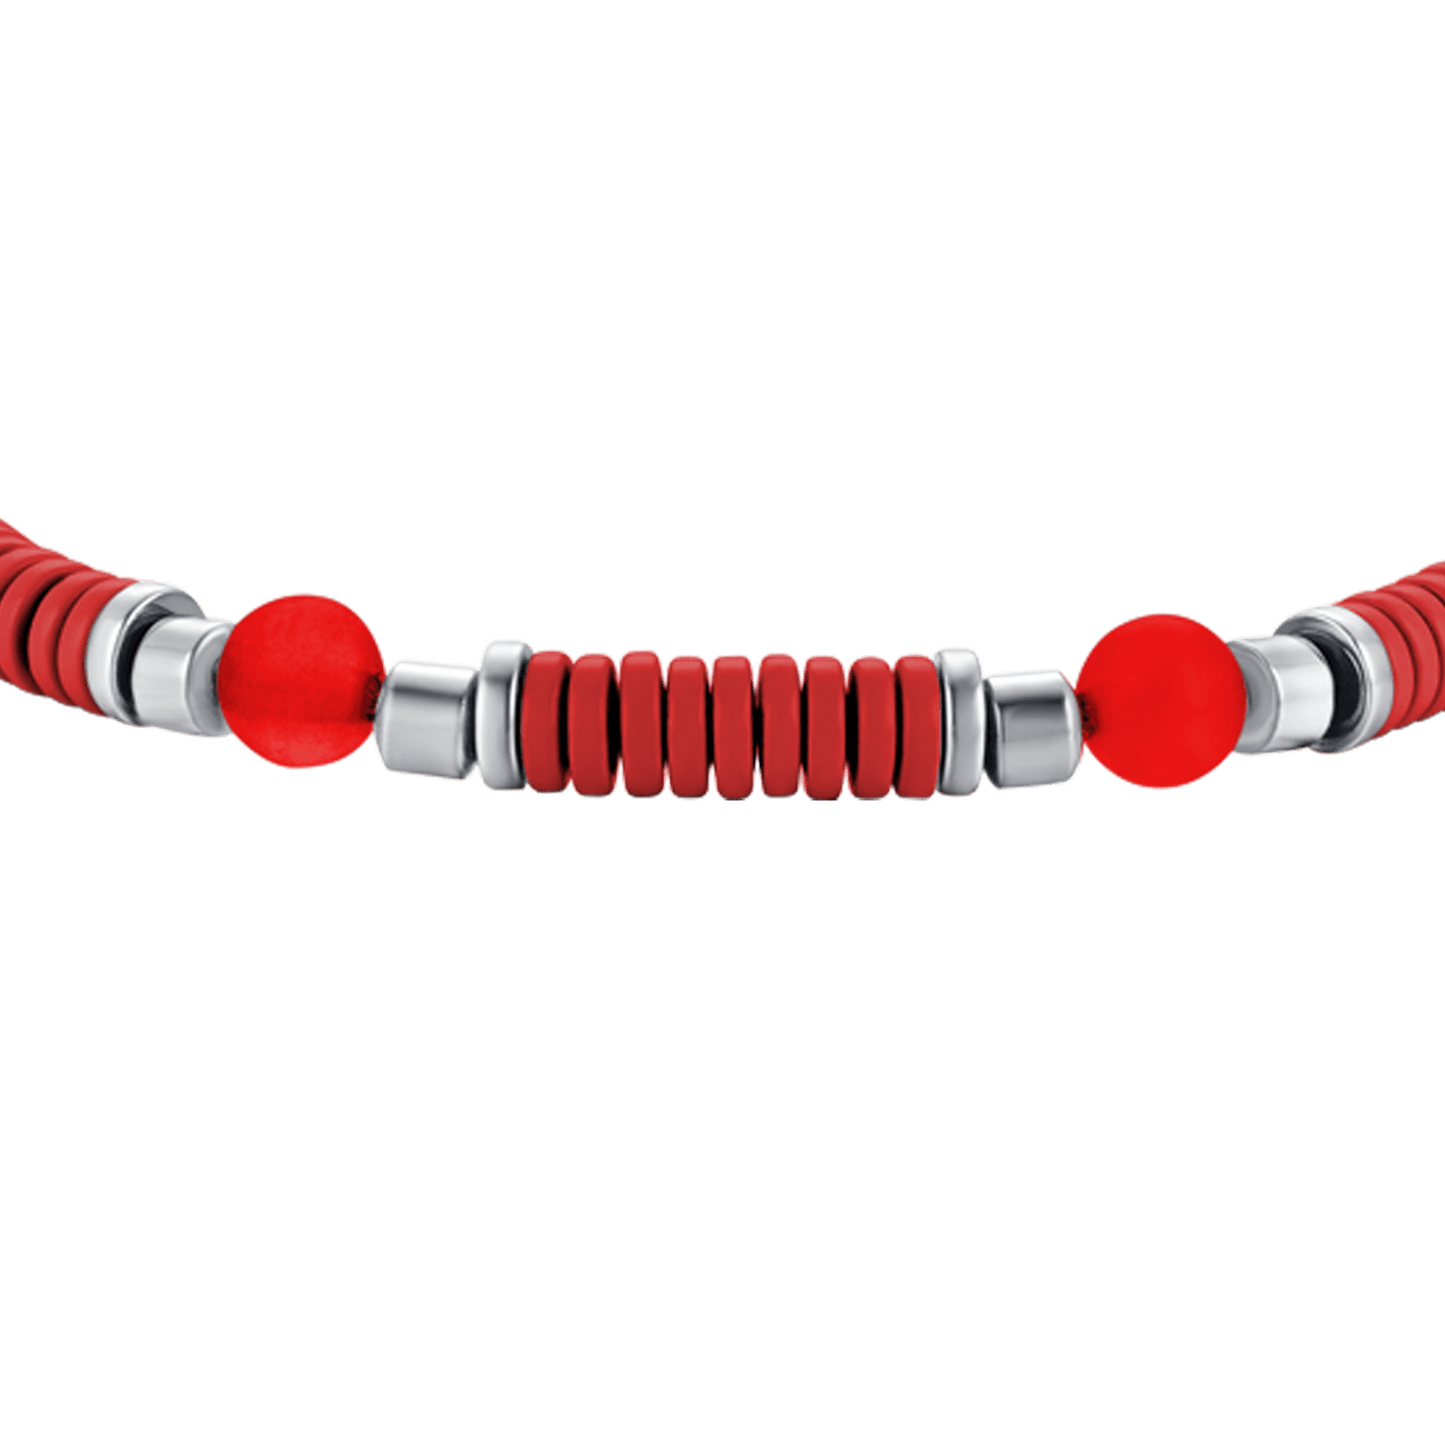 STEEL BABY BRACELET WITH RED STONES AND RED ENAMEL ELEMENTS